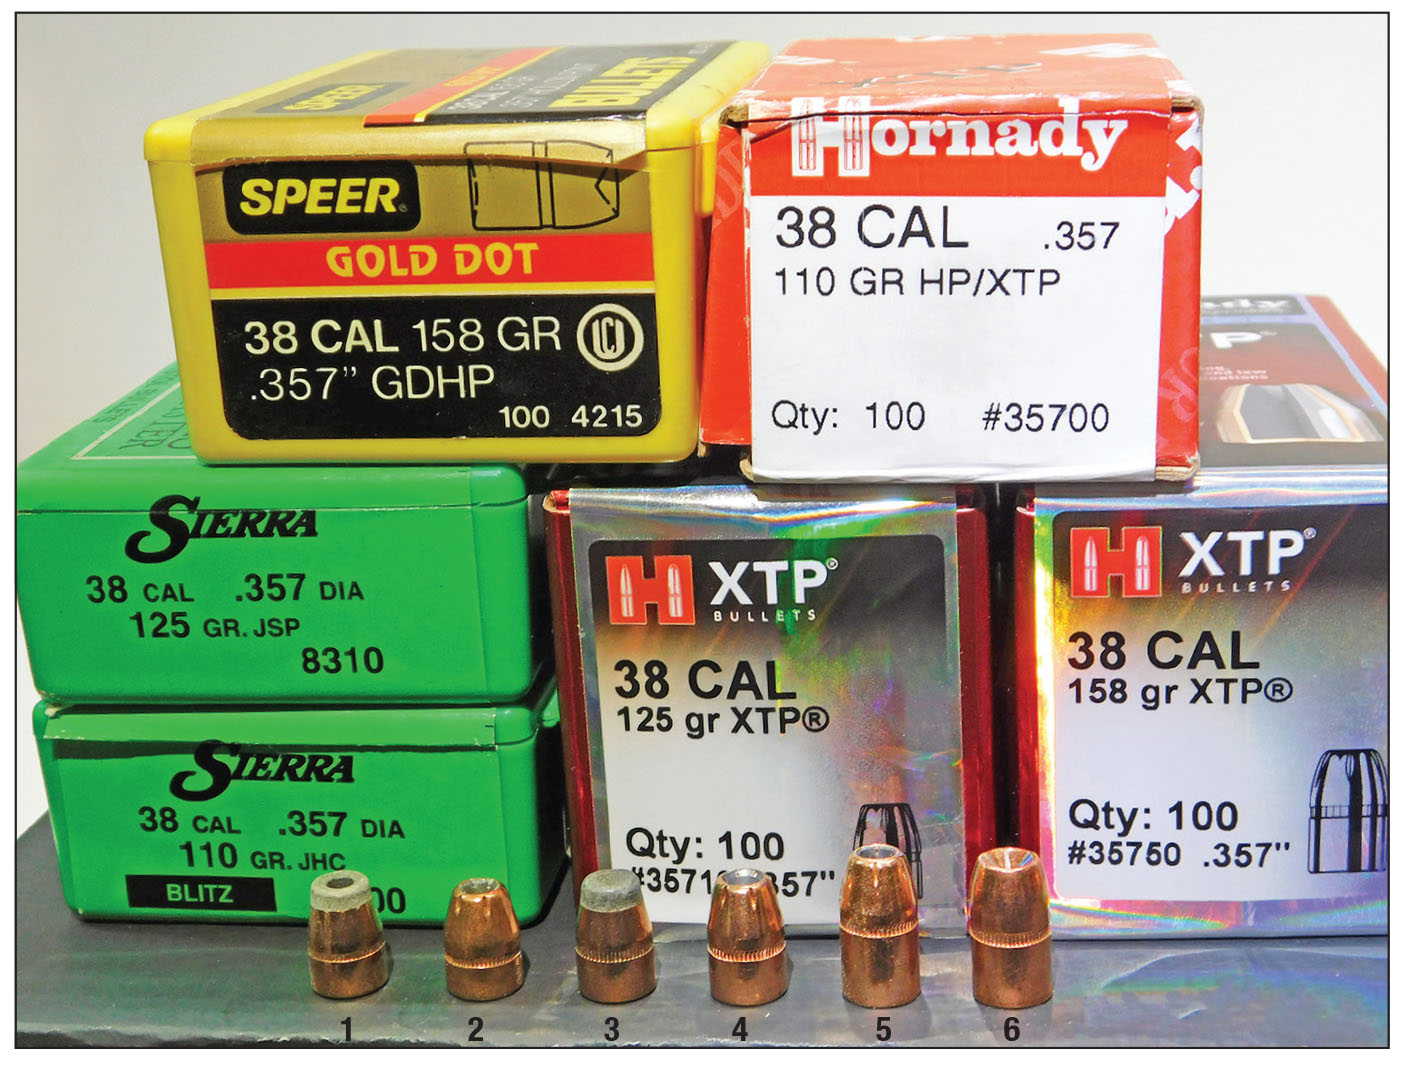 These six .357-caliber bullets were tested for performance in the LCR: (1) Sierra 110-grain JHC, (2) Hornady 110-grain HP/XTP, (3) Sierra 125-grain JSP, (4) Hornady 125-grain XTP, (5) Hornady 158-grain XTP and (6) Speer 158-grain GDHP.